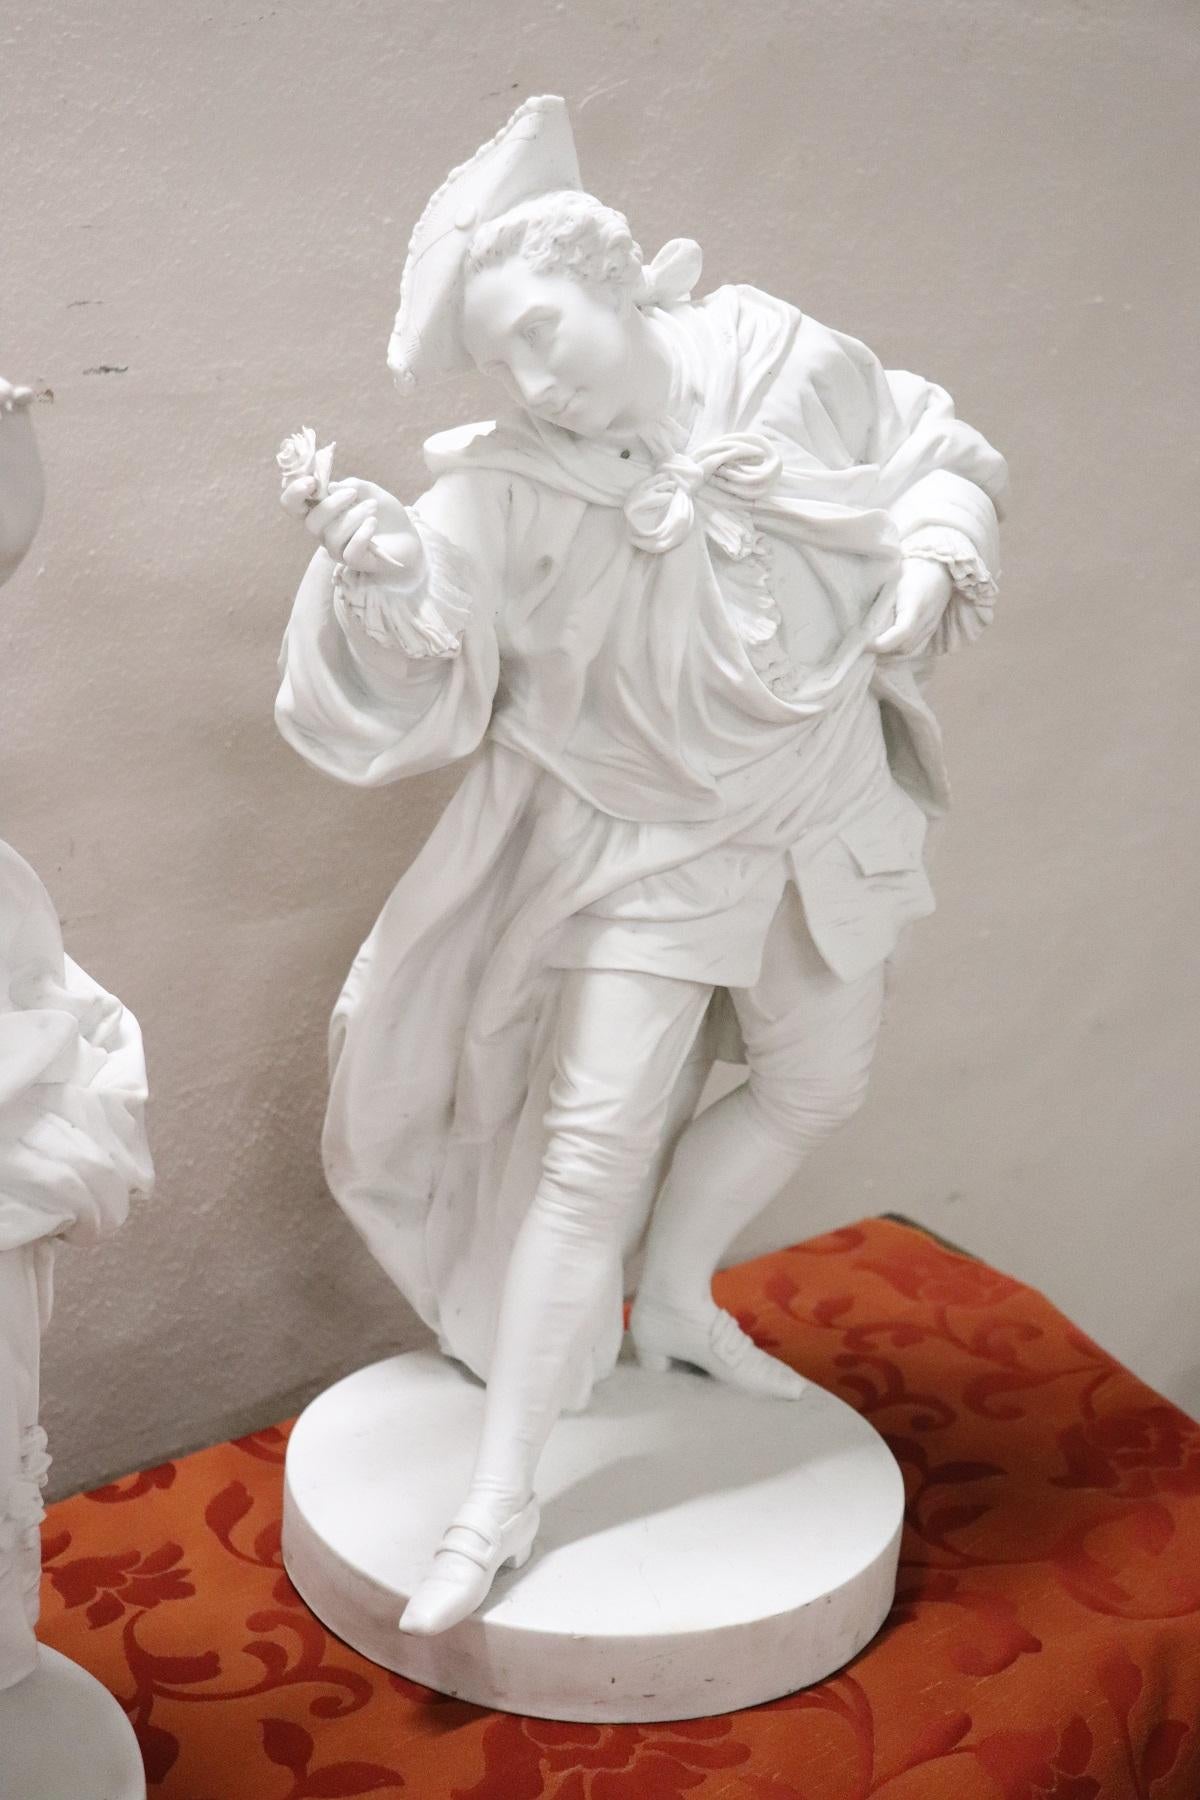 Beautiful biscuit porcelain sculptures. A loving couple in 19th century clothes. The boy hands a flower to his beloved. Great artistic quality, please look at the details made with perfection.